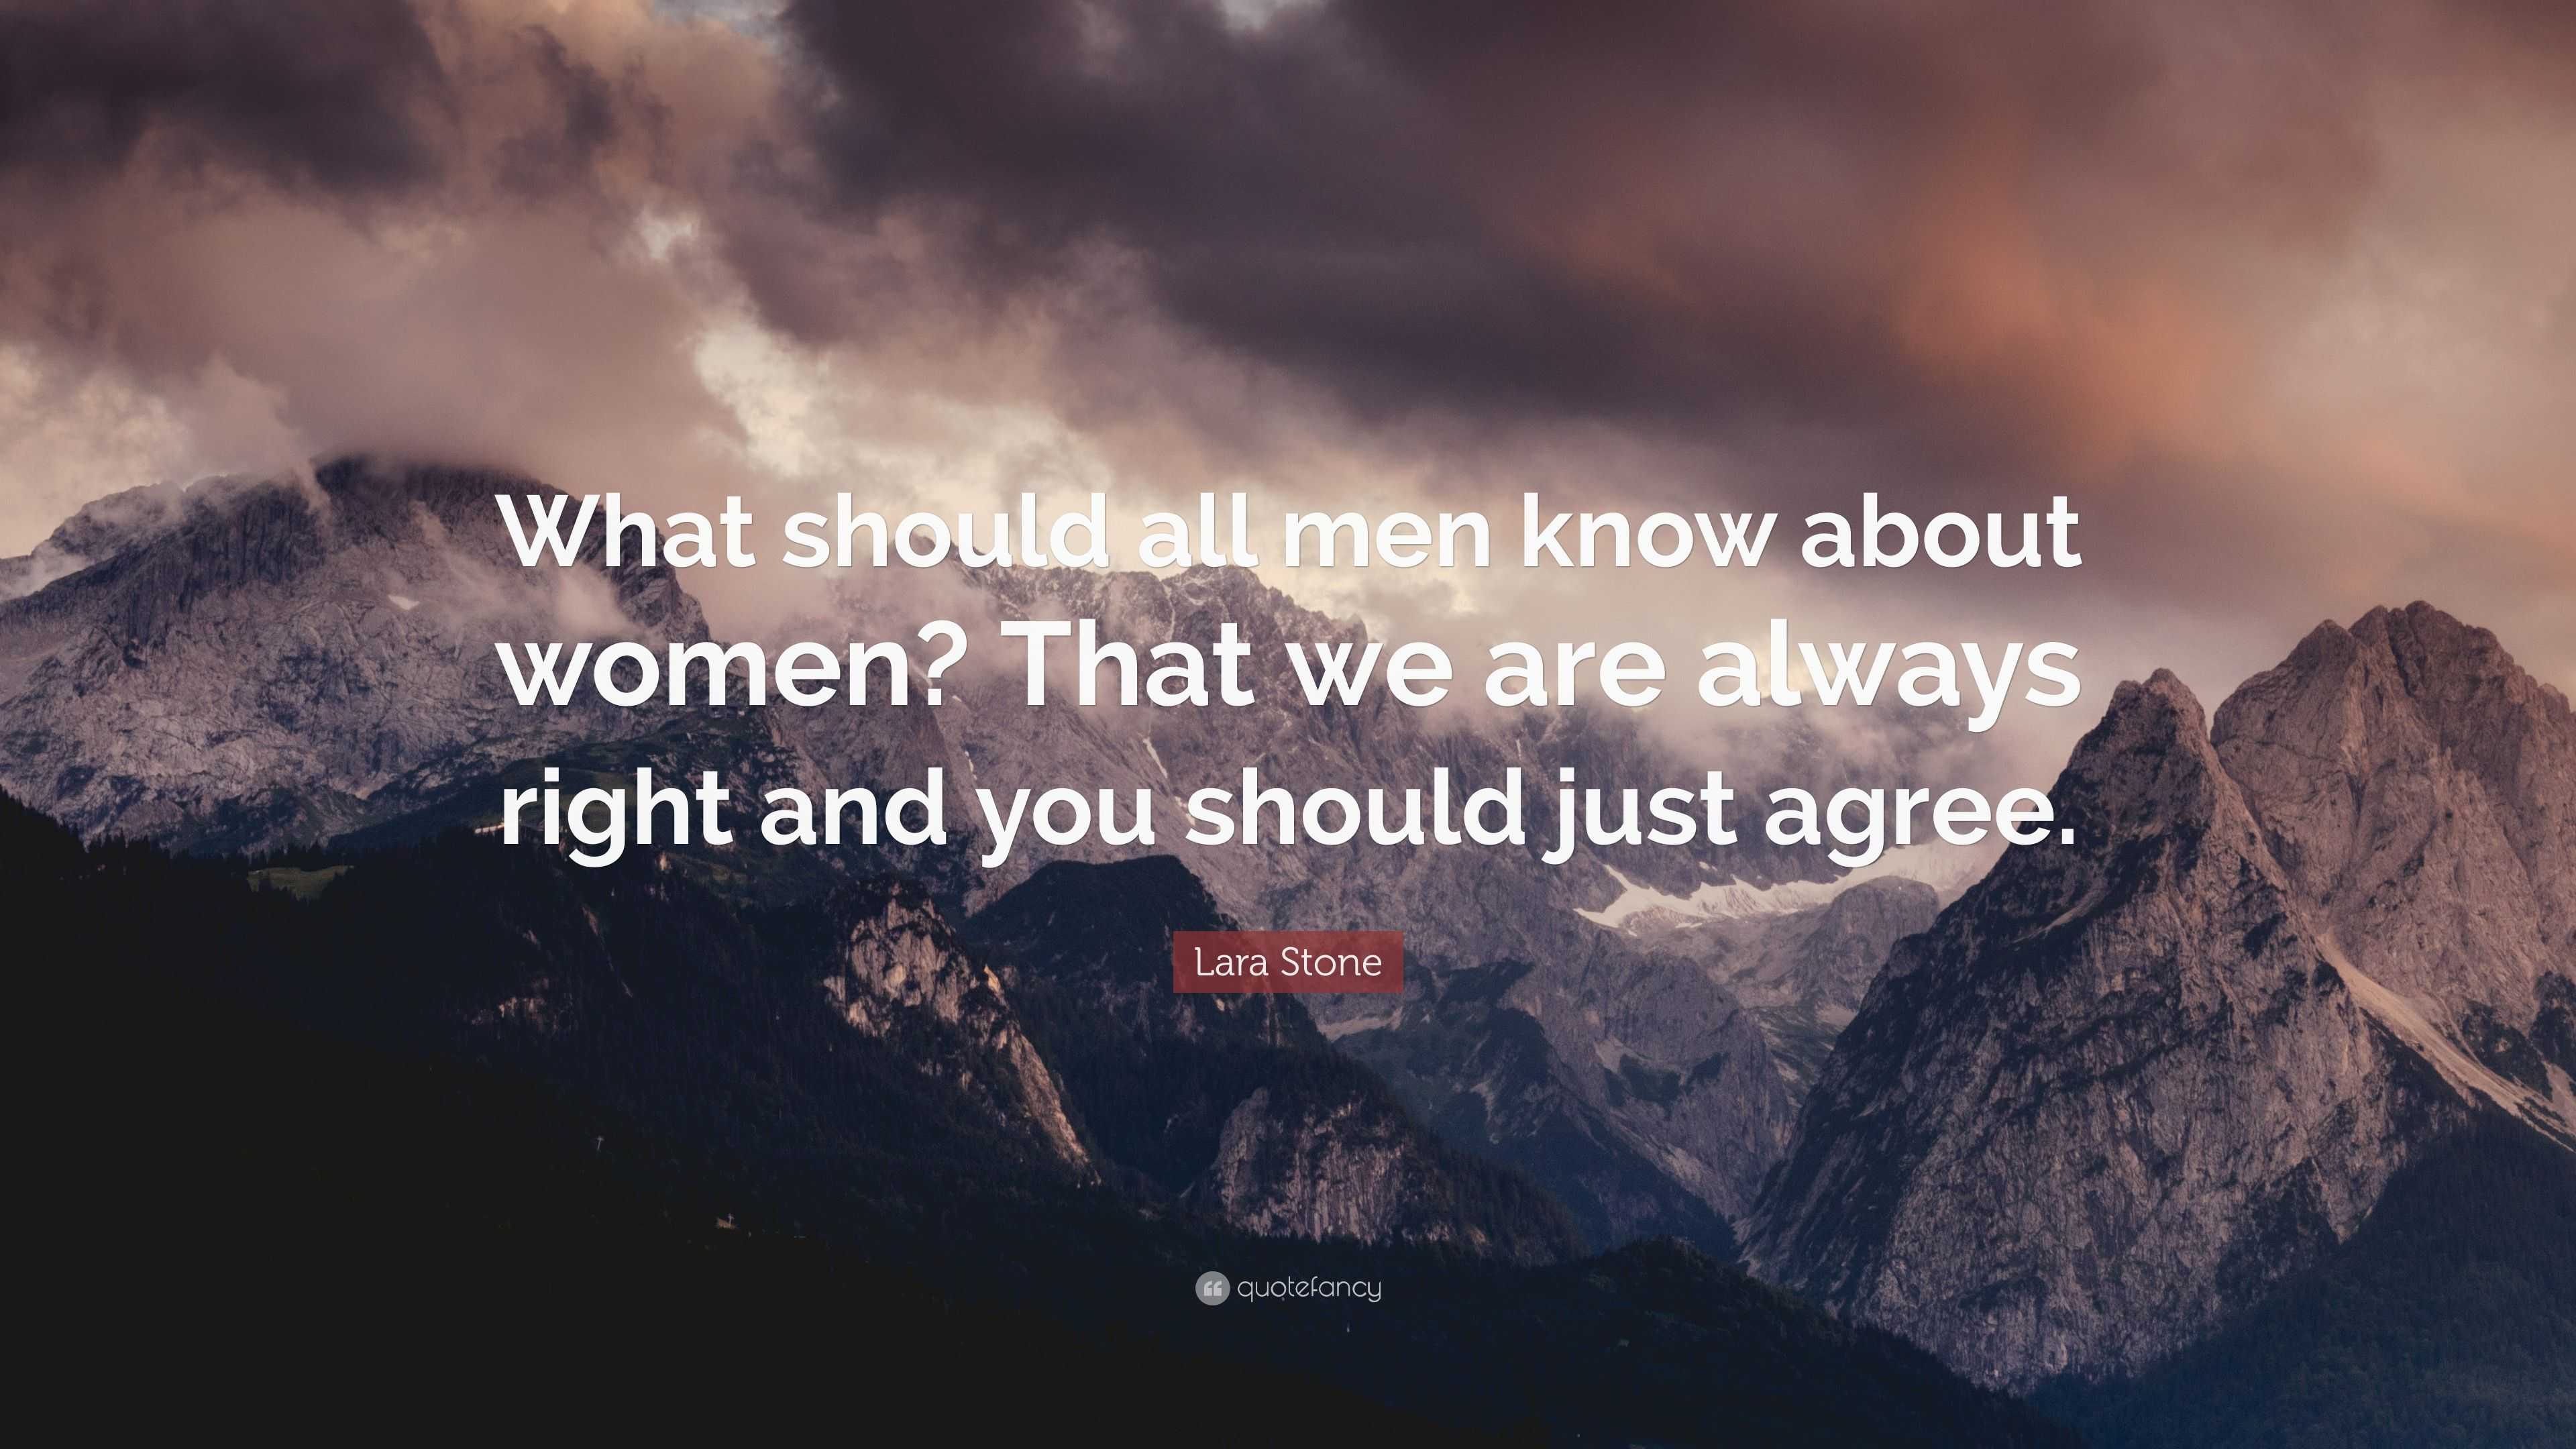 Lara Stone Quote: “What should all men know about women? That we are ...